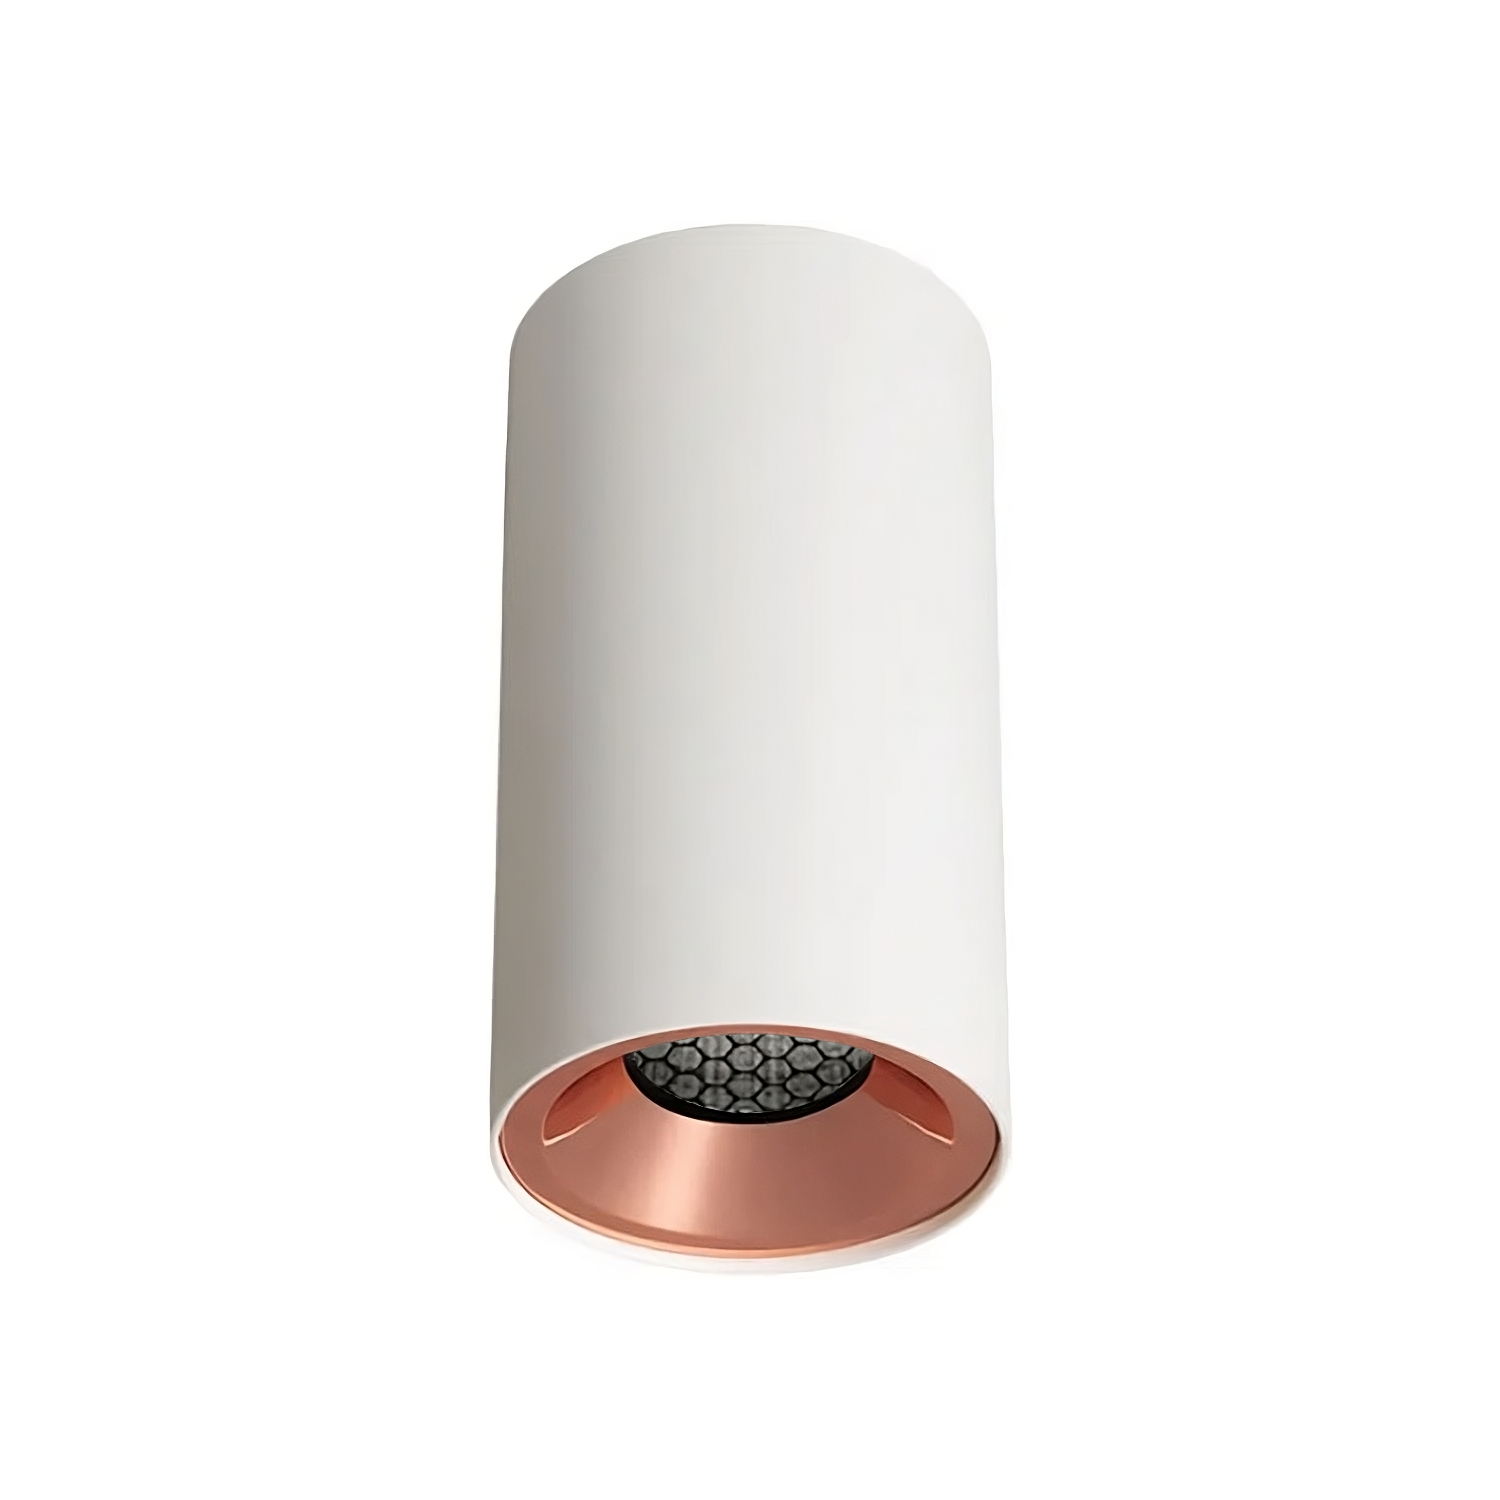 Product image of Zela Surface Mount with Honeycomb Lens White with Copper Inner